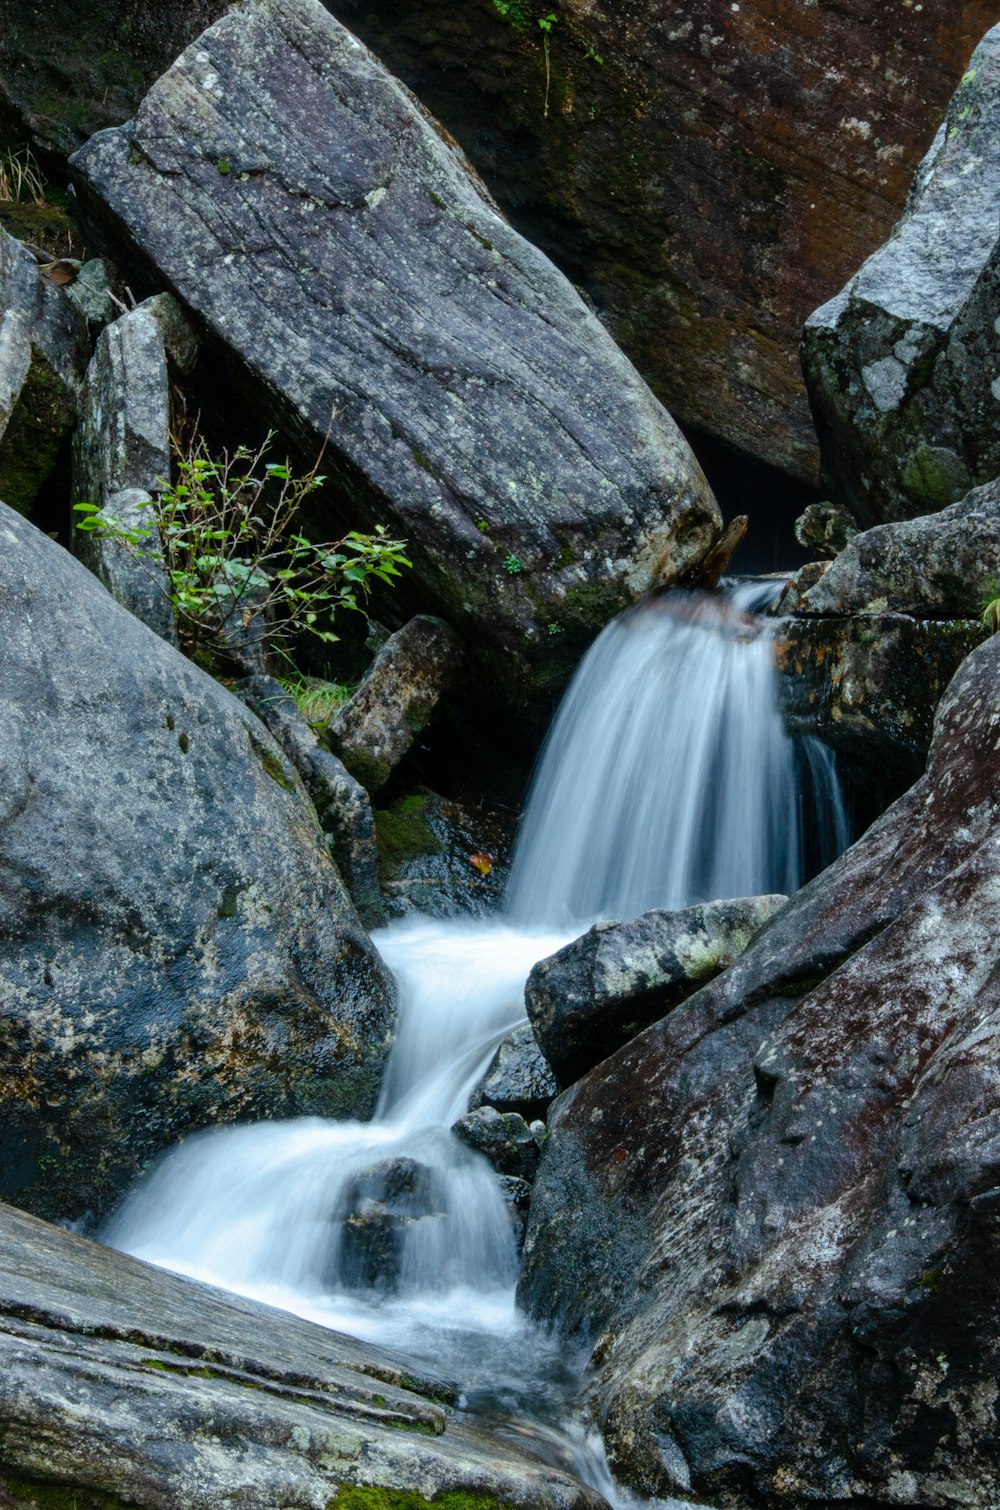 a small waterfall in a rocky place